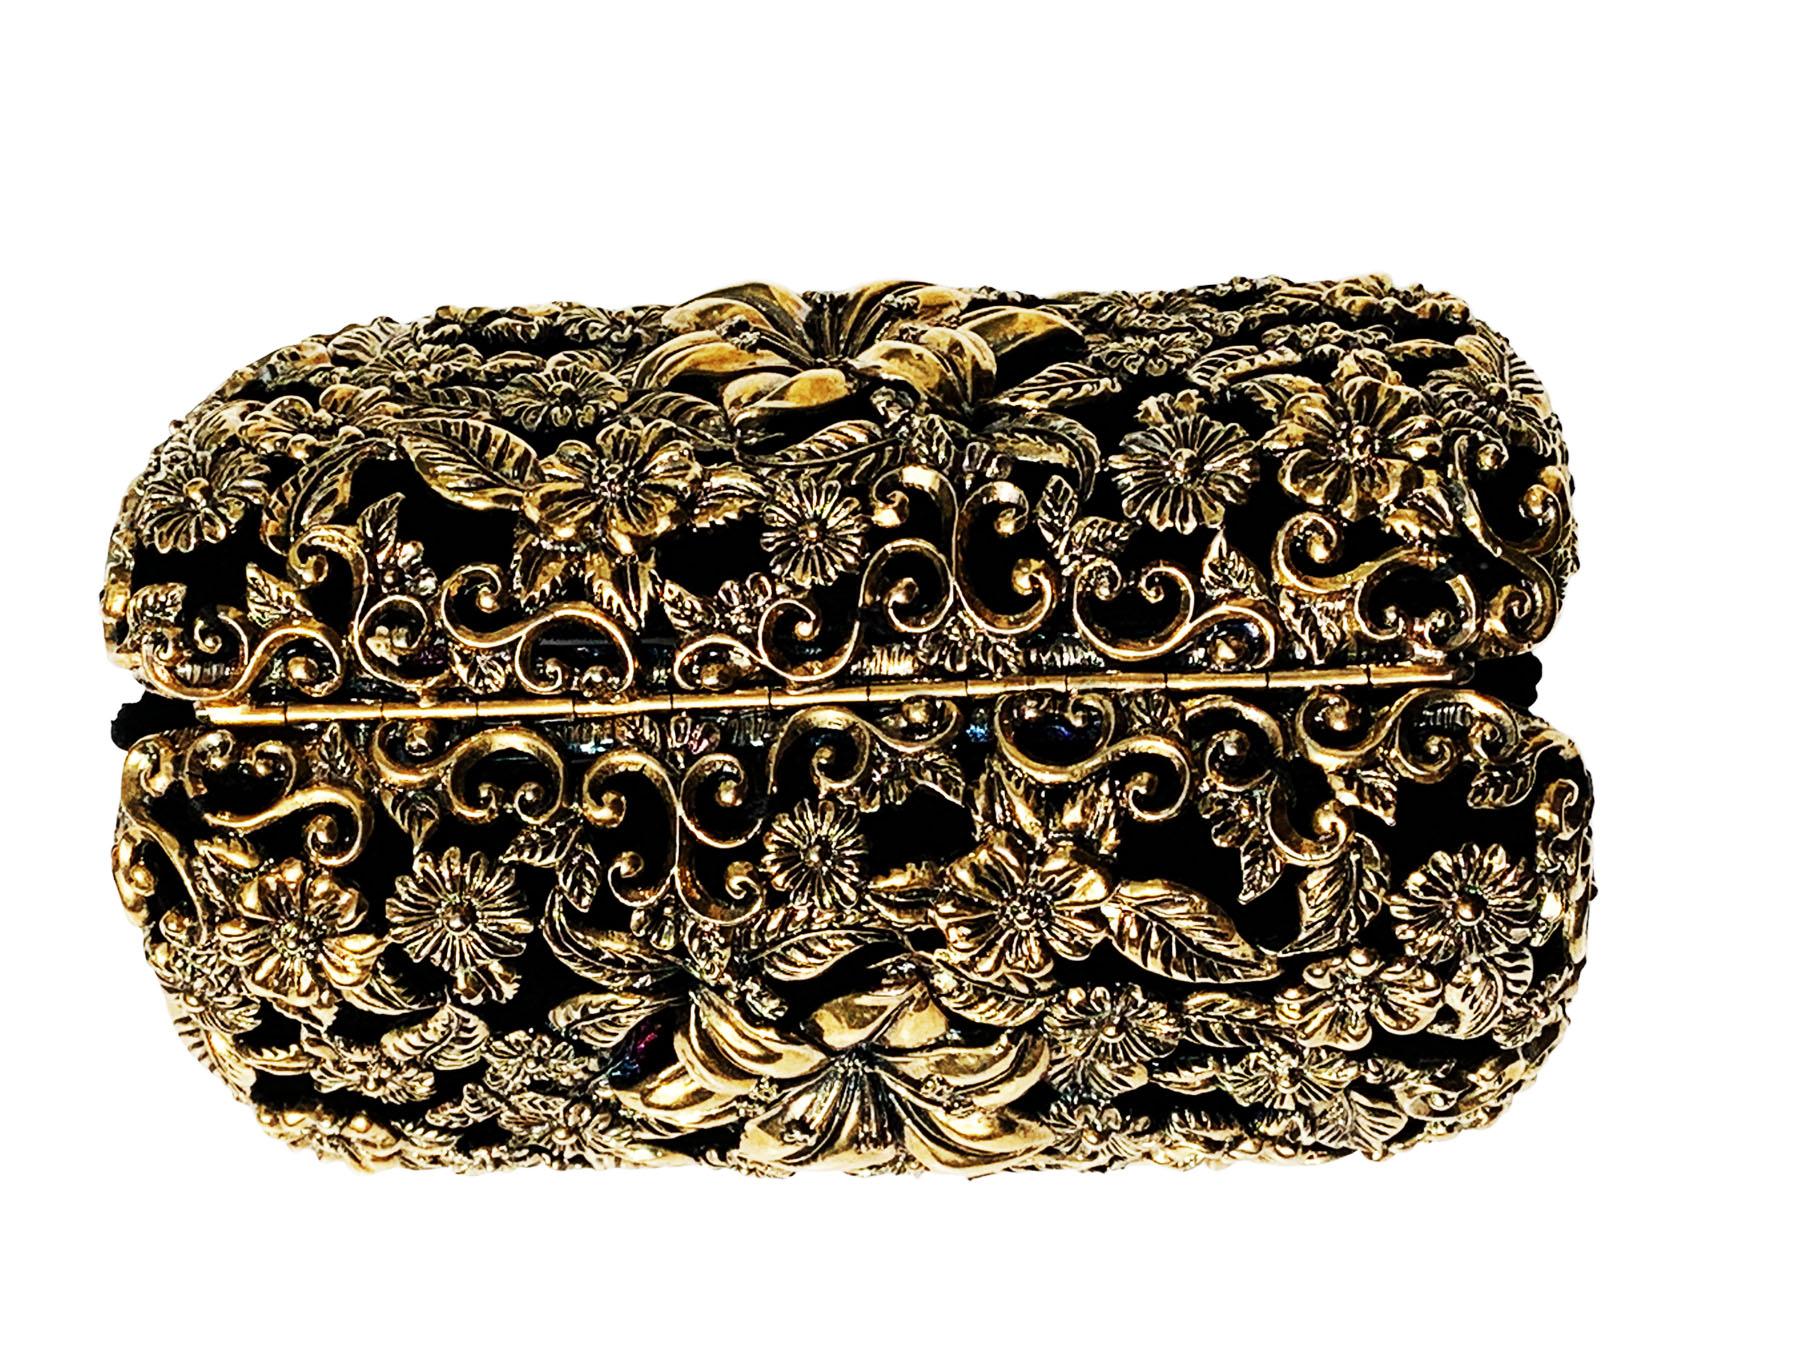 Vintage Yves Saint Laurent Rive Gauche Limited Edition Gold Metal Clutch  In Excellent Condition For Sale In Montgomery, TX